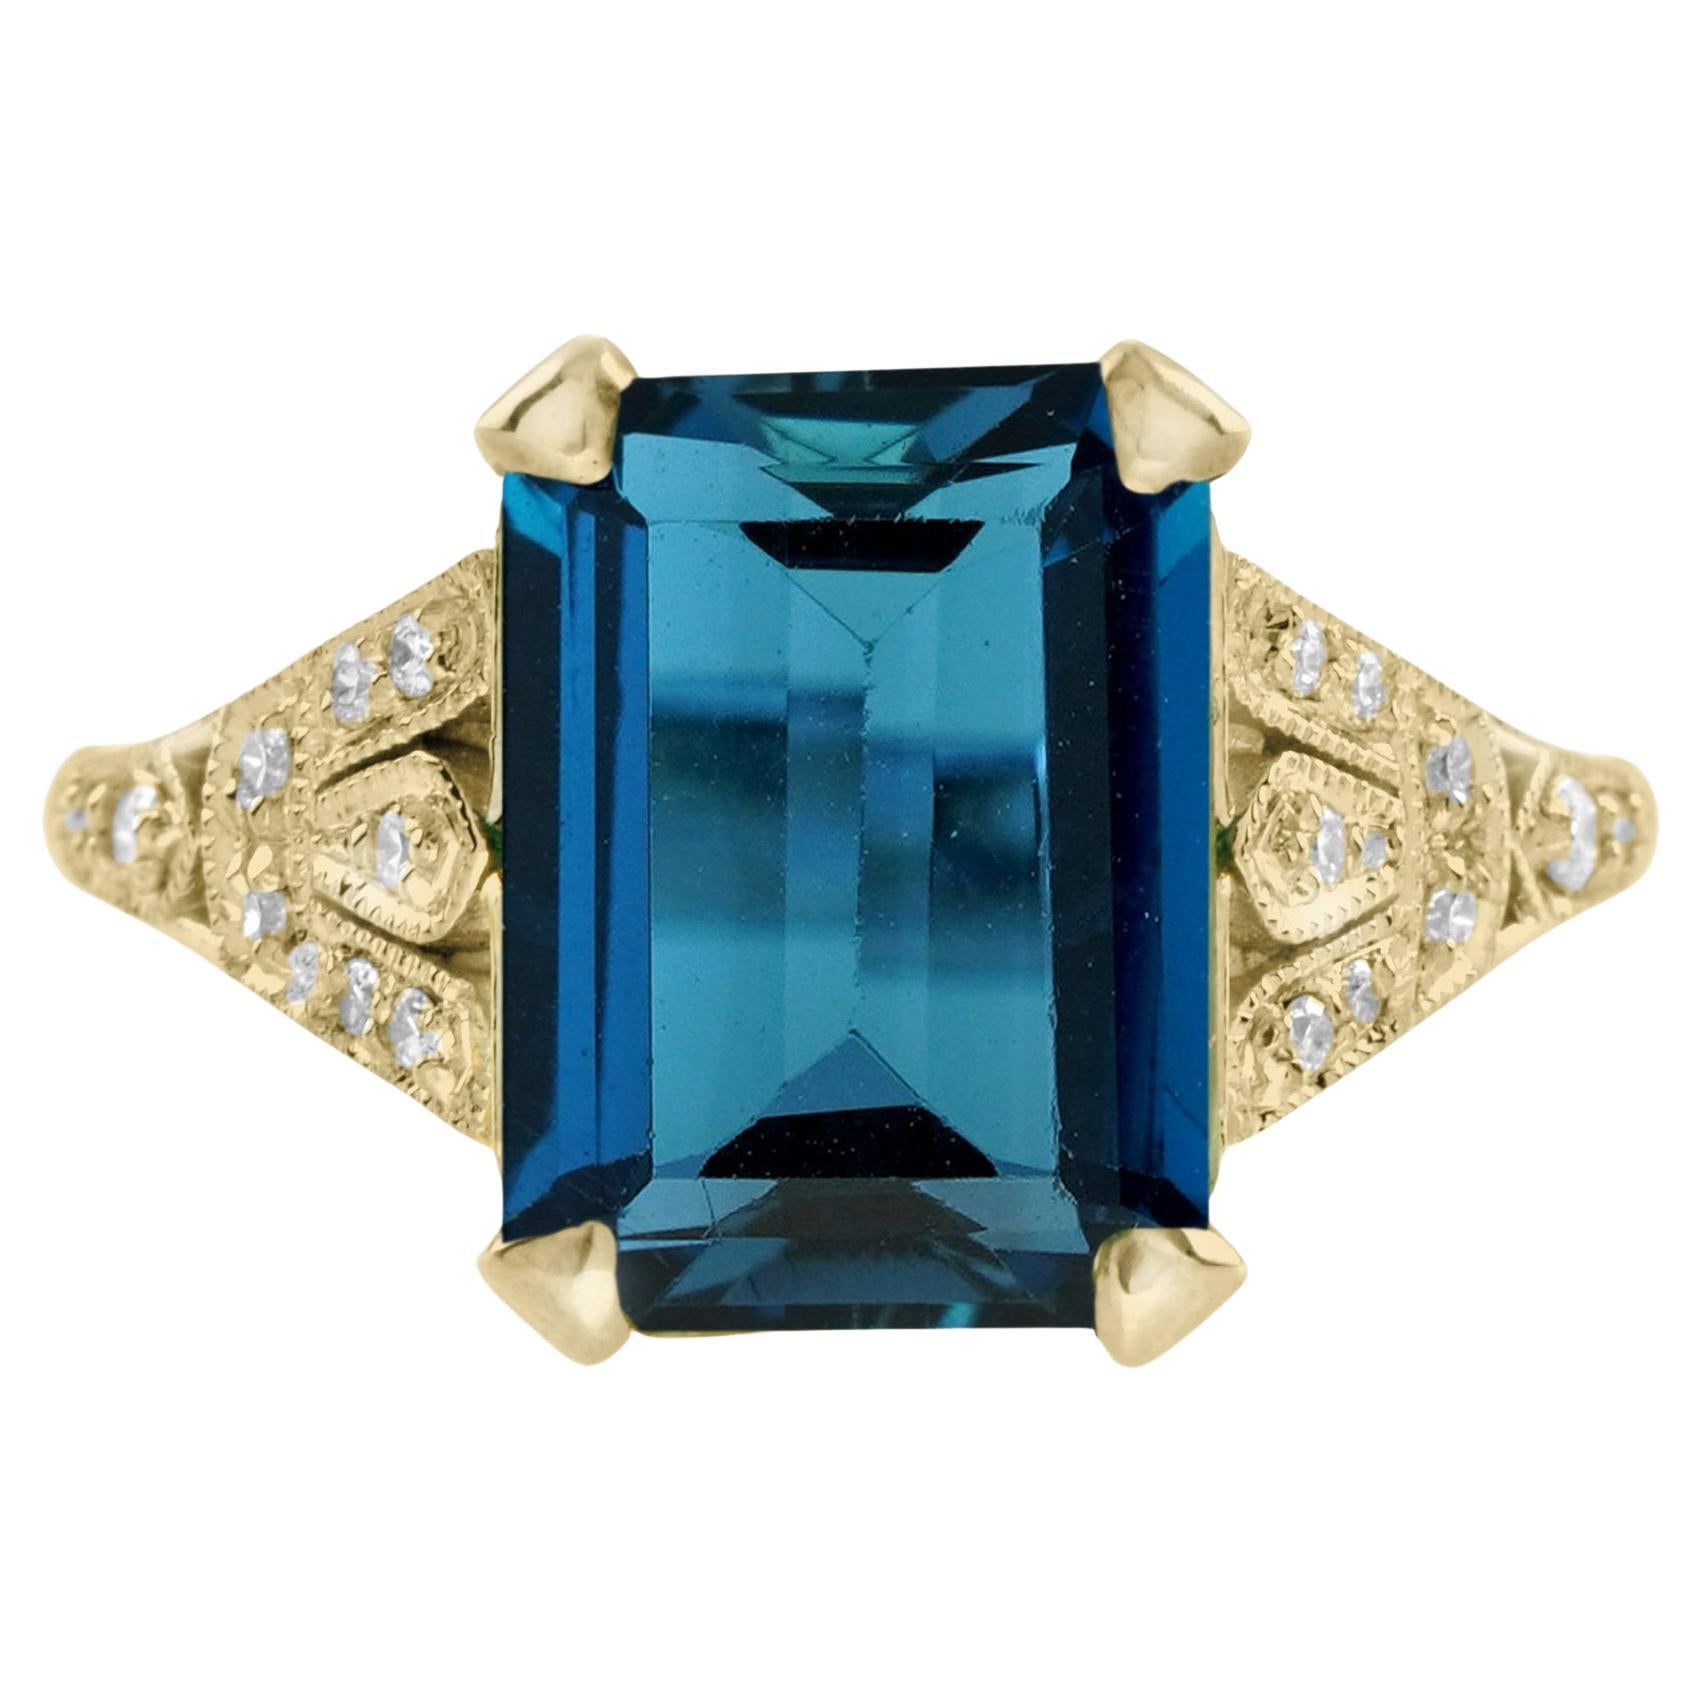 Emerald Cut London Blue Topaz and Diamond Solitaire Ring in 14K Yellow Gold